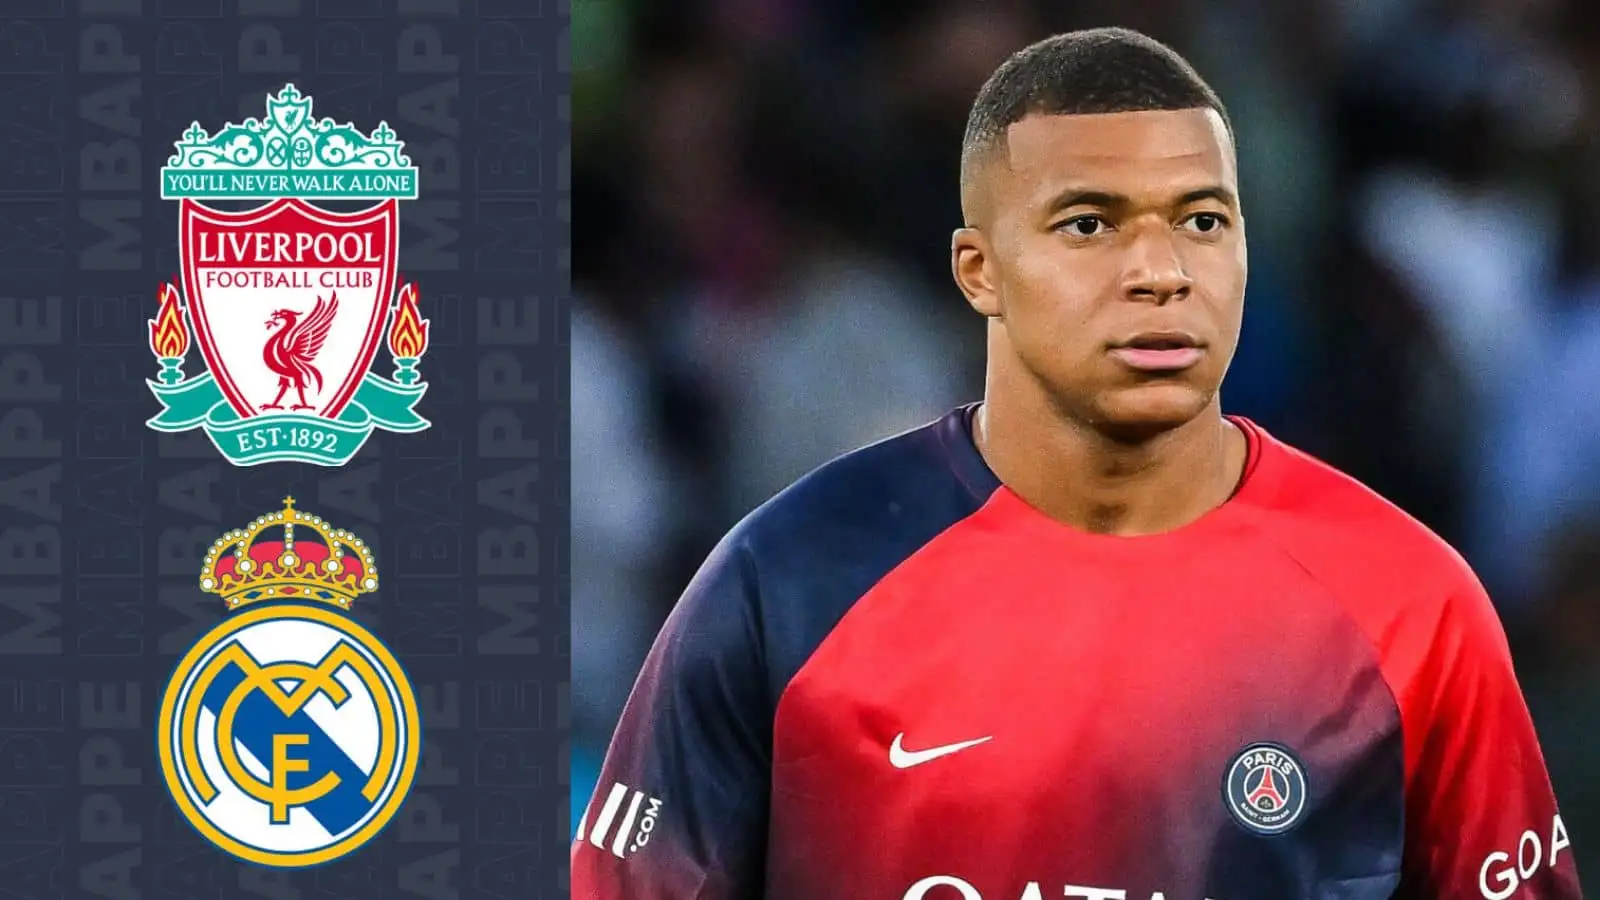 PSG forward Kylian Mbappe is being tipped to join Liverpool ahead of Real Madrid